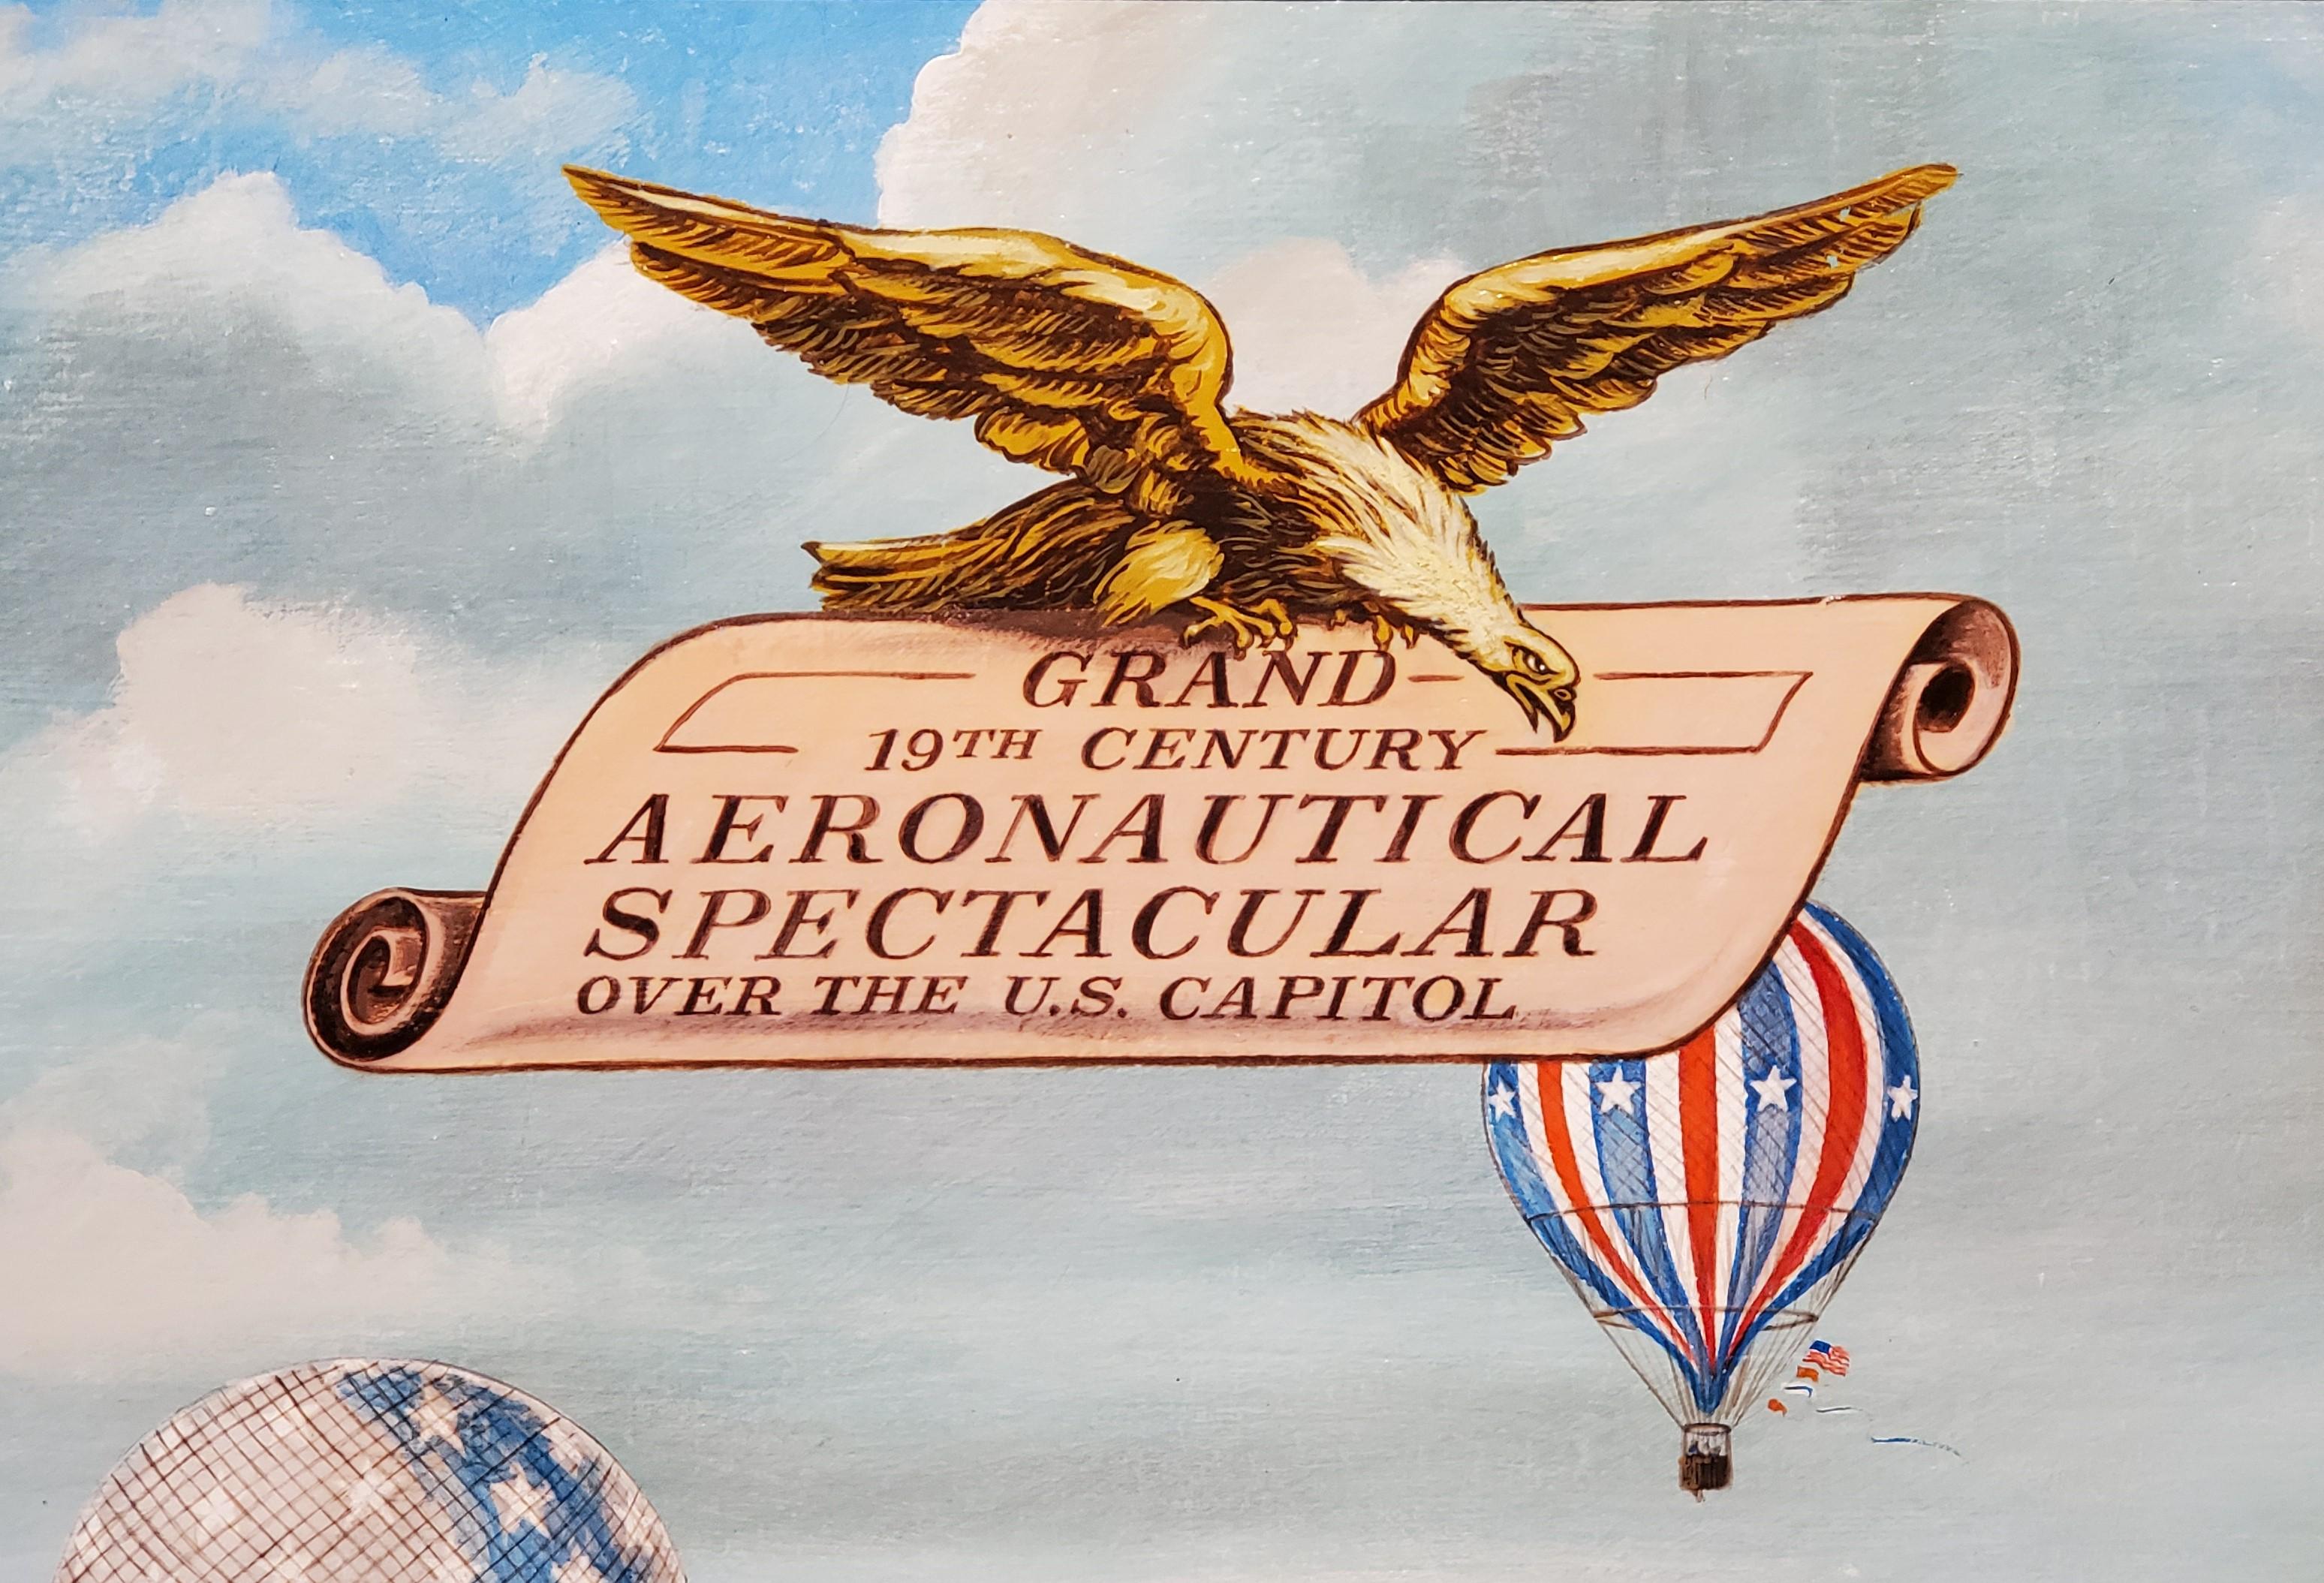 Grand 19th century Aeronautical Spectacular Over the US Capitol by Morris Flight 2